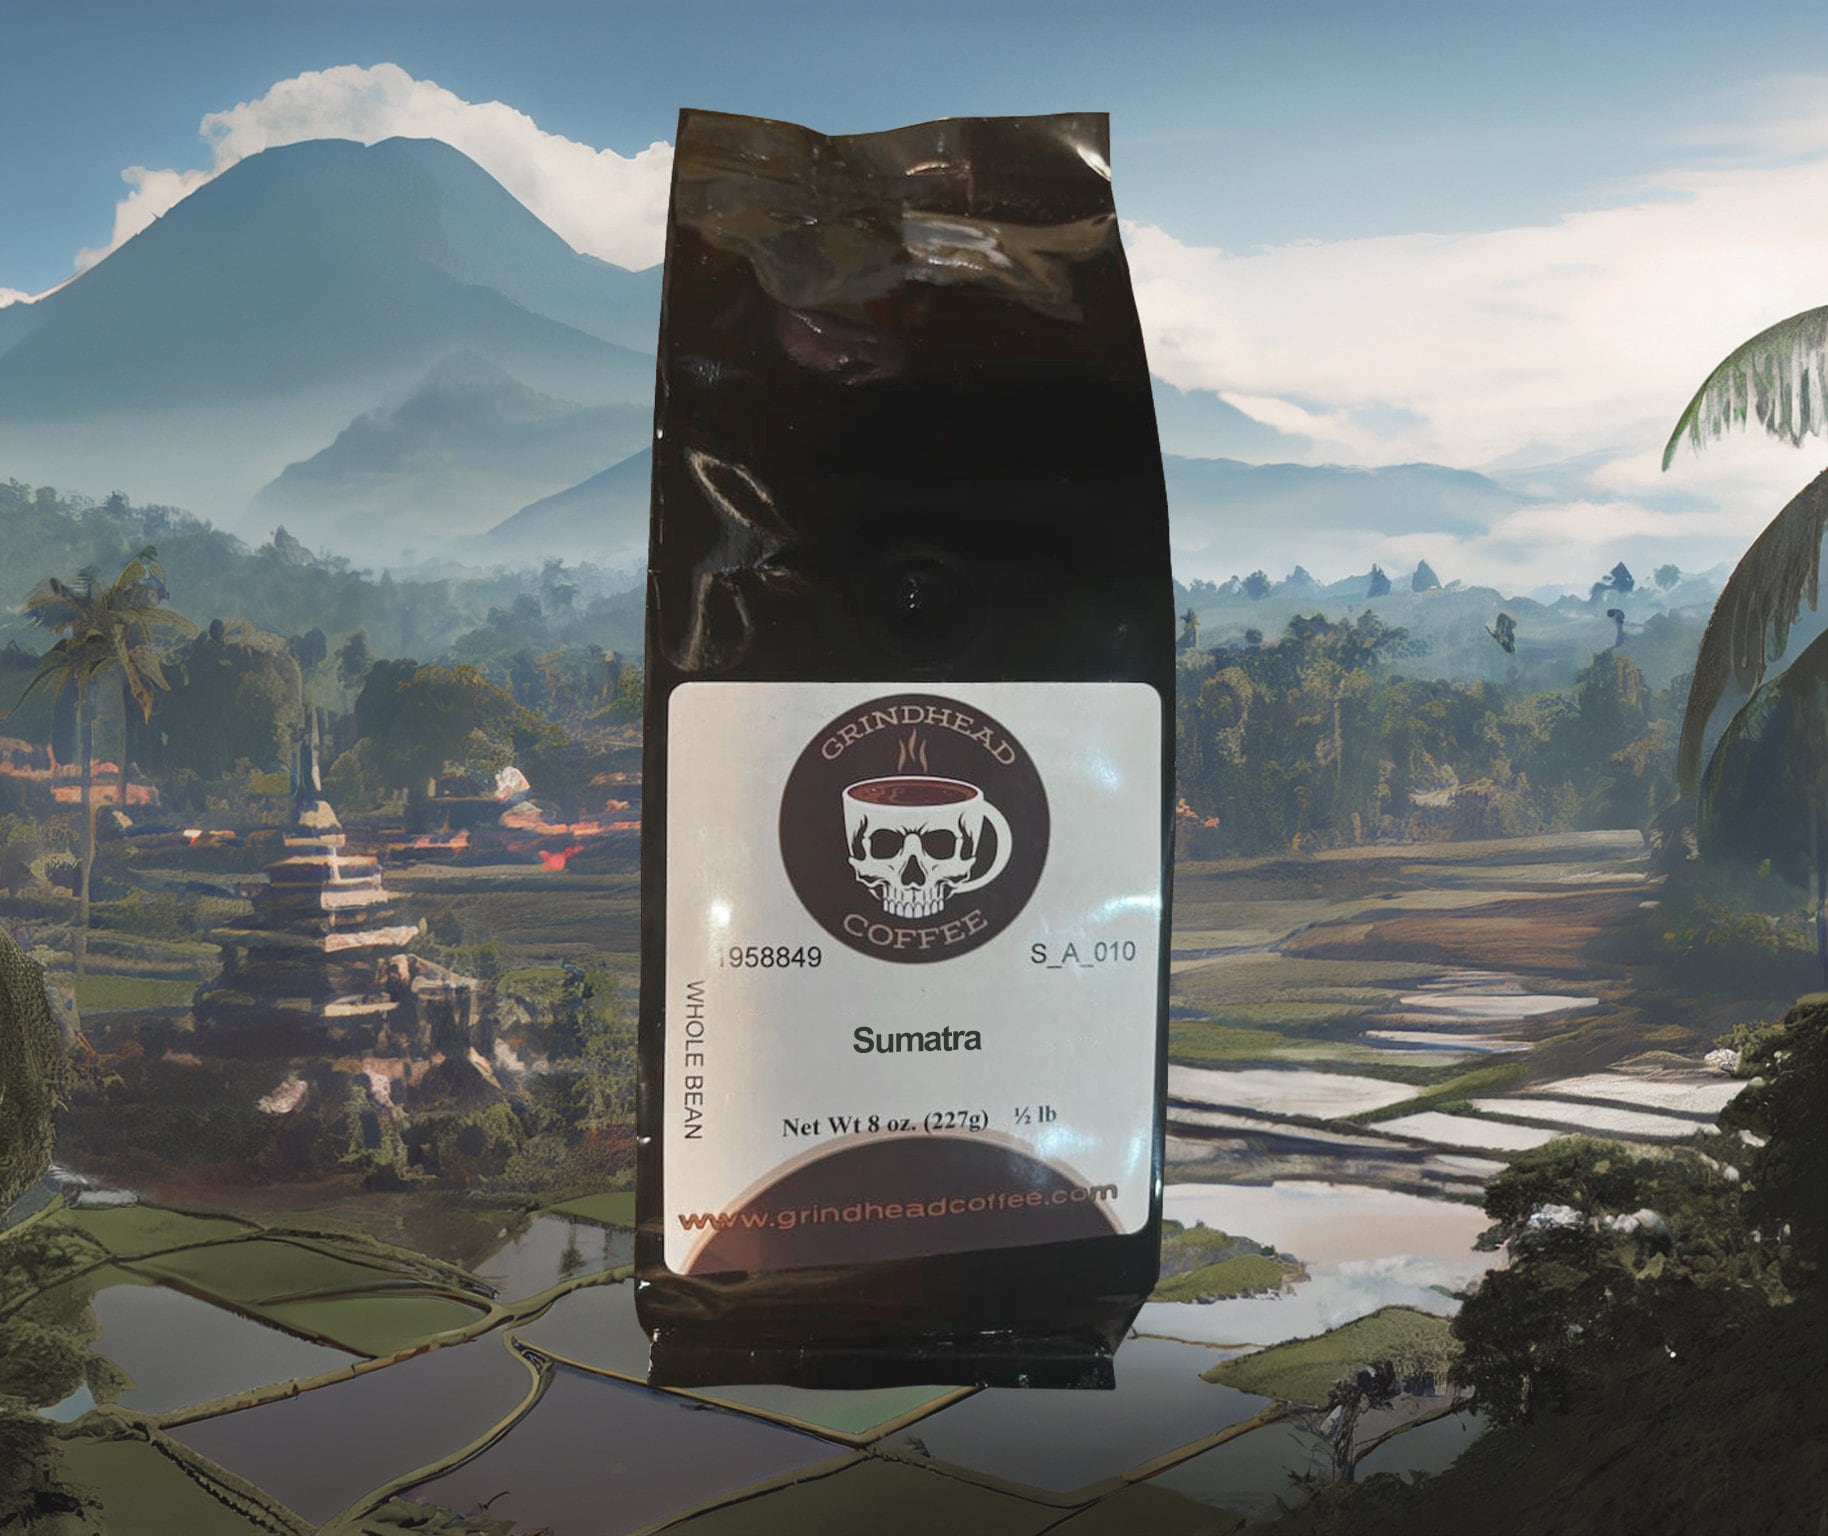 Black Coffee Beans from Sumatra - Coffee Lover Gift - Dark-bodied brew